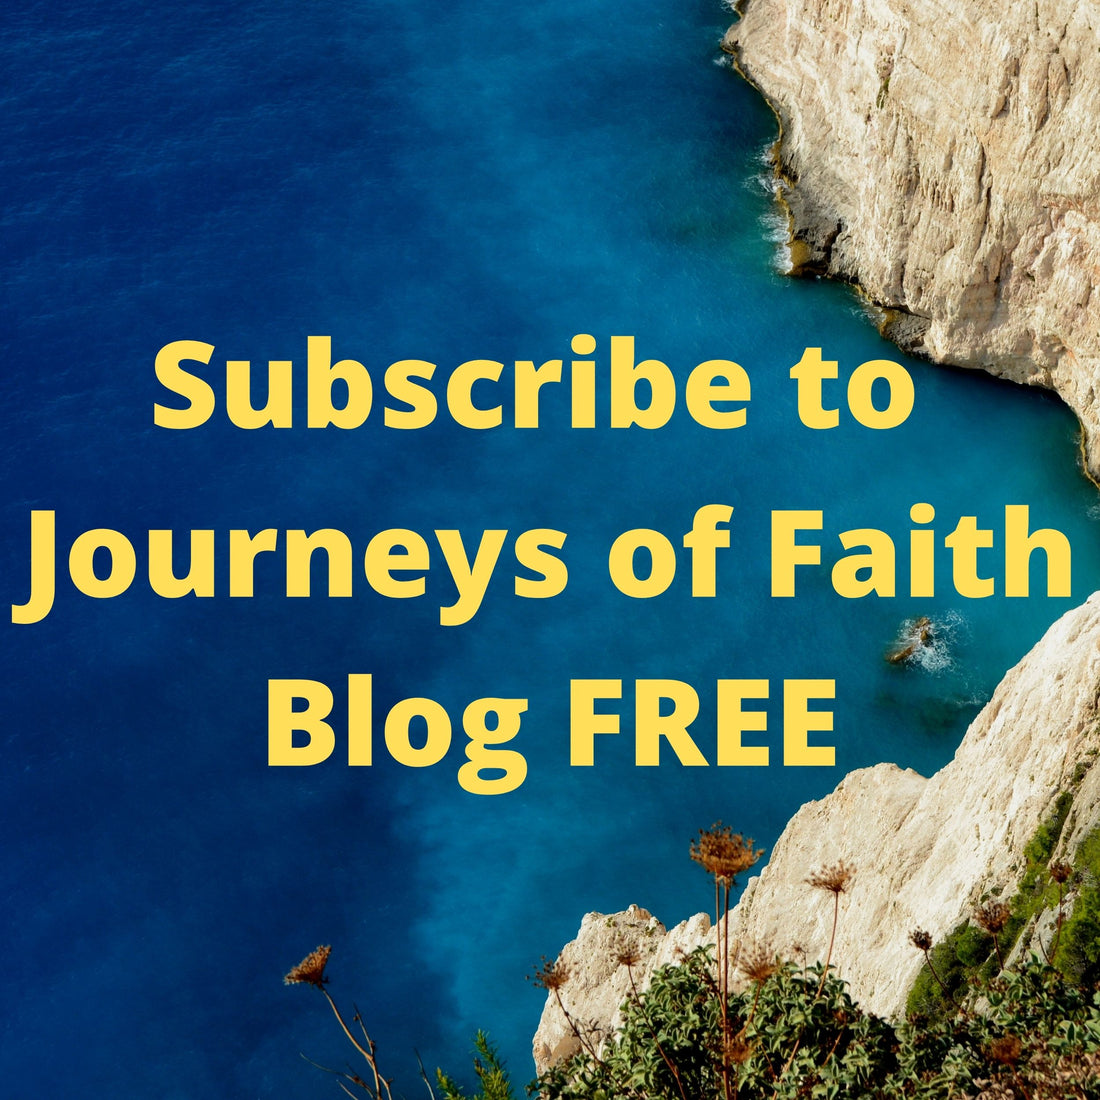 How to subscribe to our Blog.